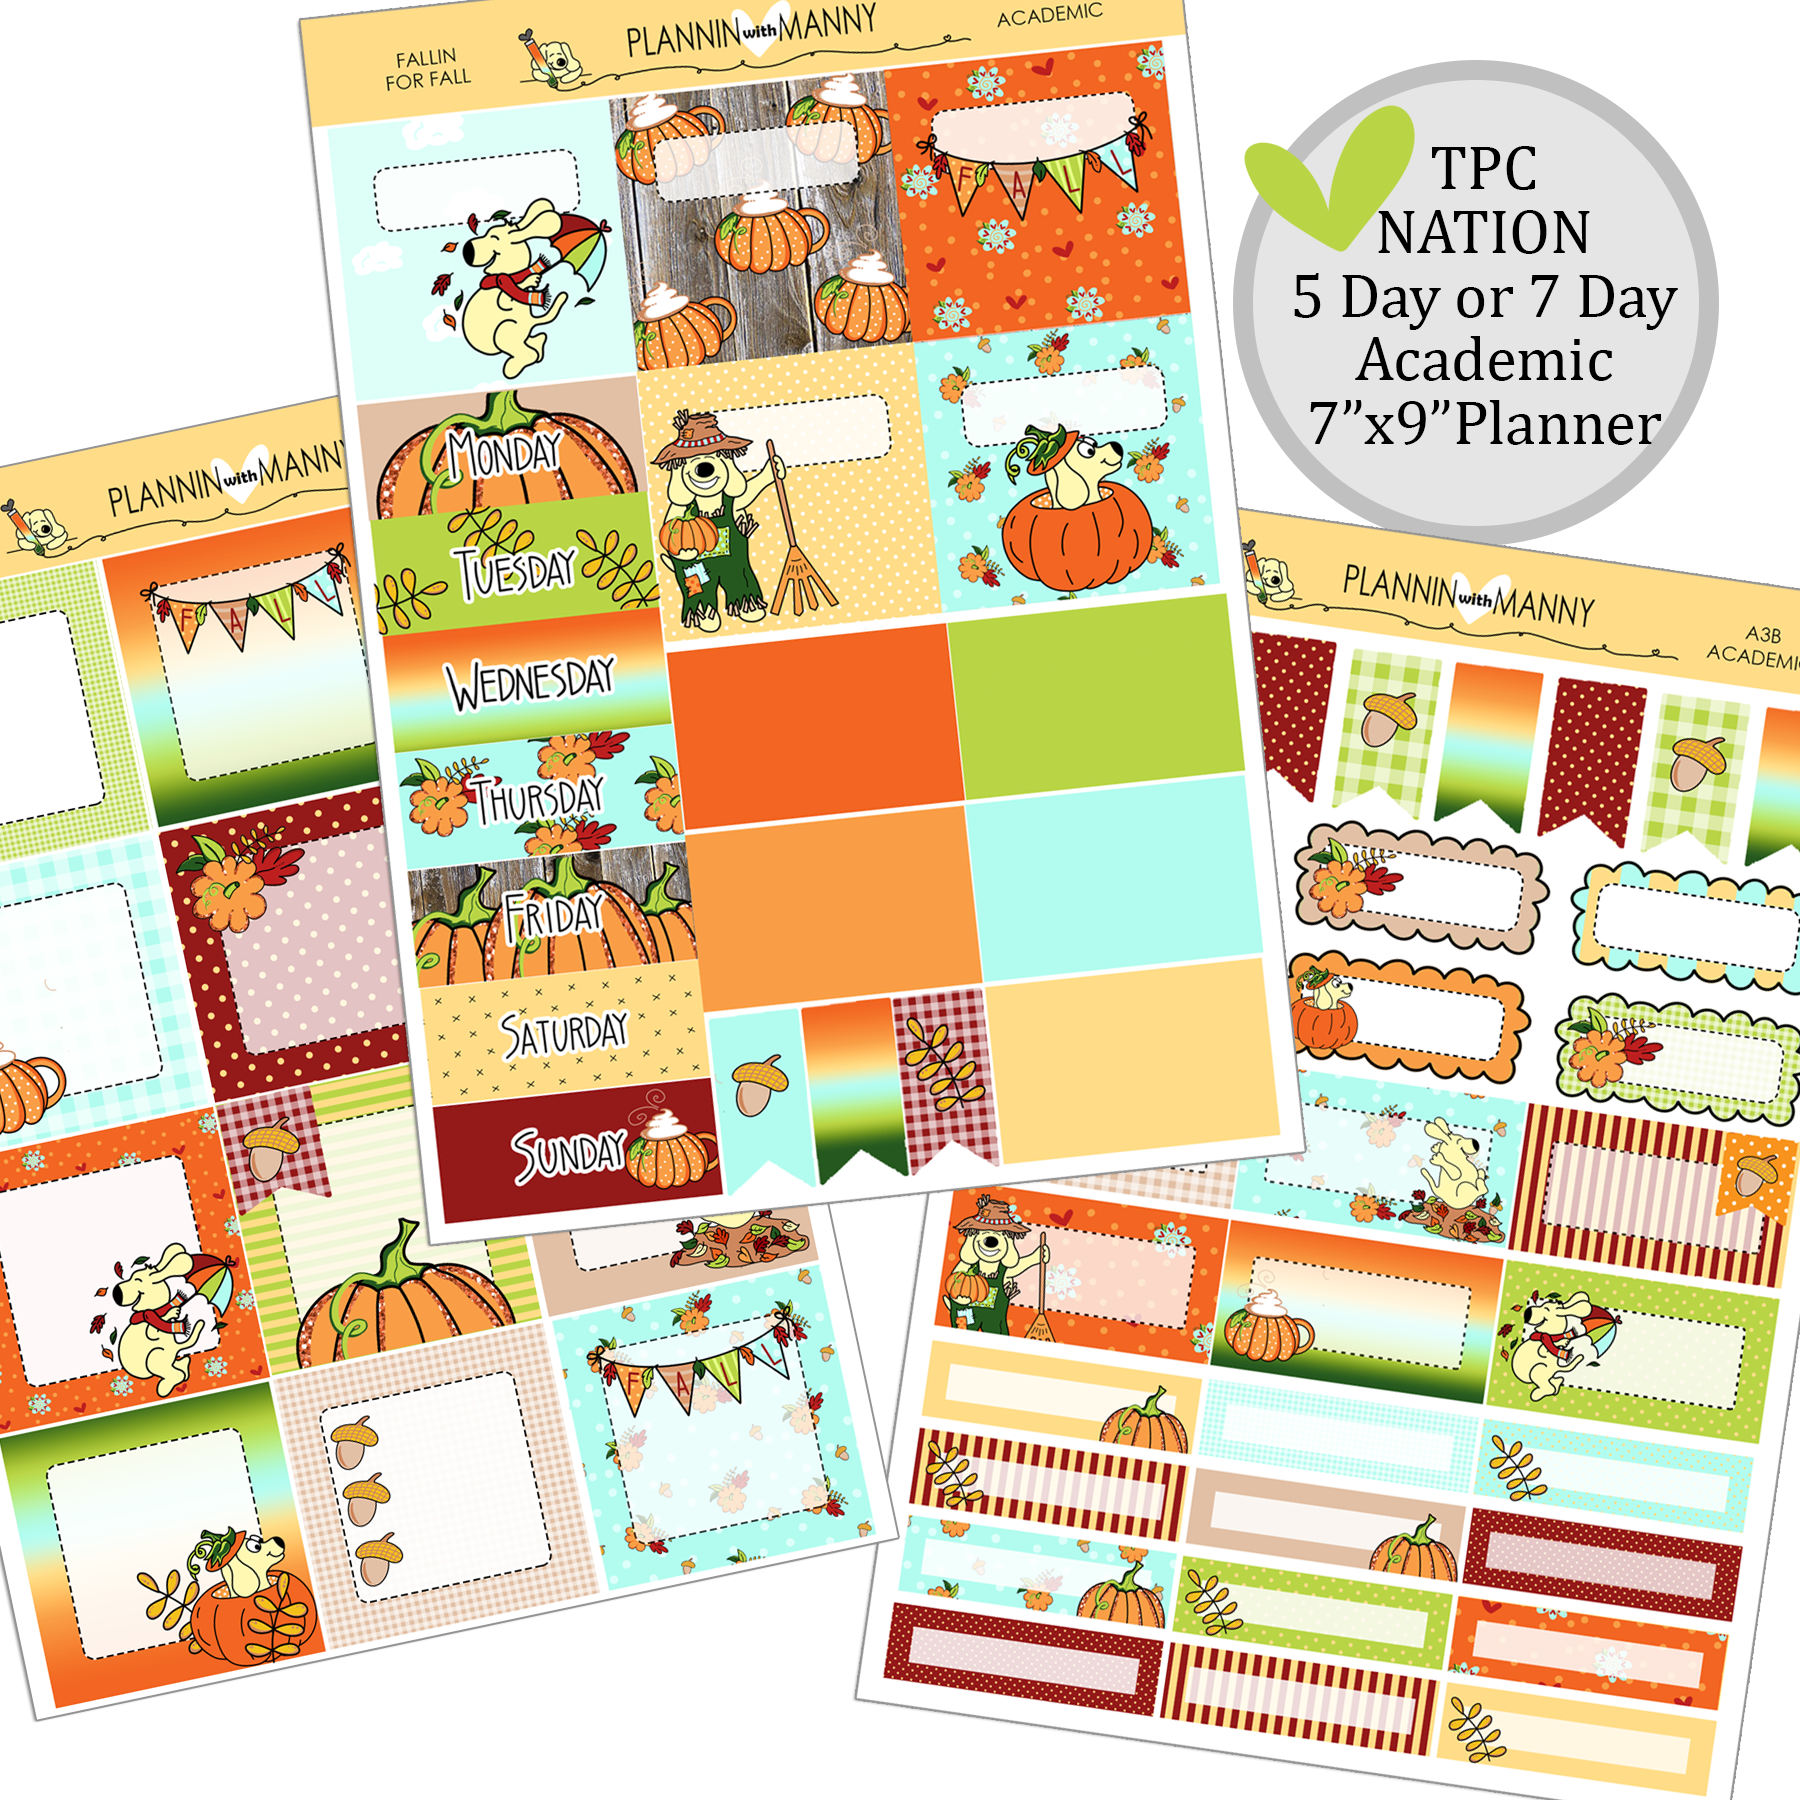 A3 TPC ACADEMIC 5 & 7 Day Weekly Planner Kit - Fallin for Fall Collection